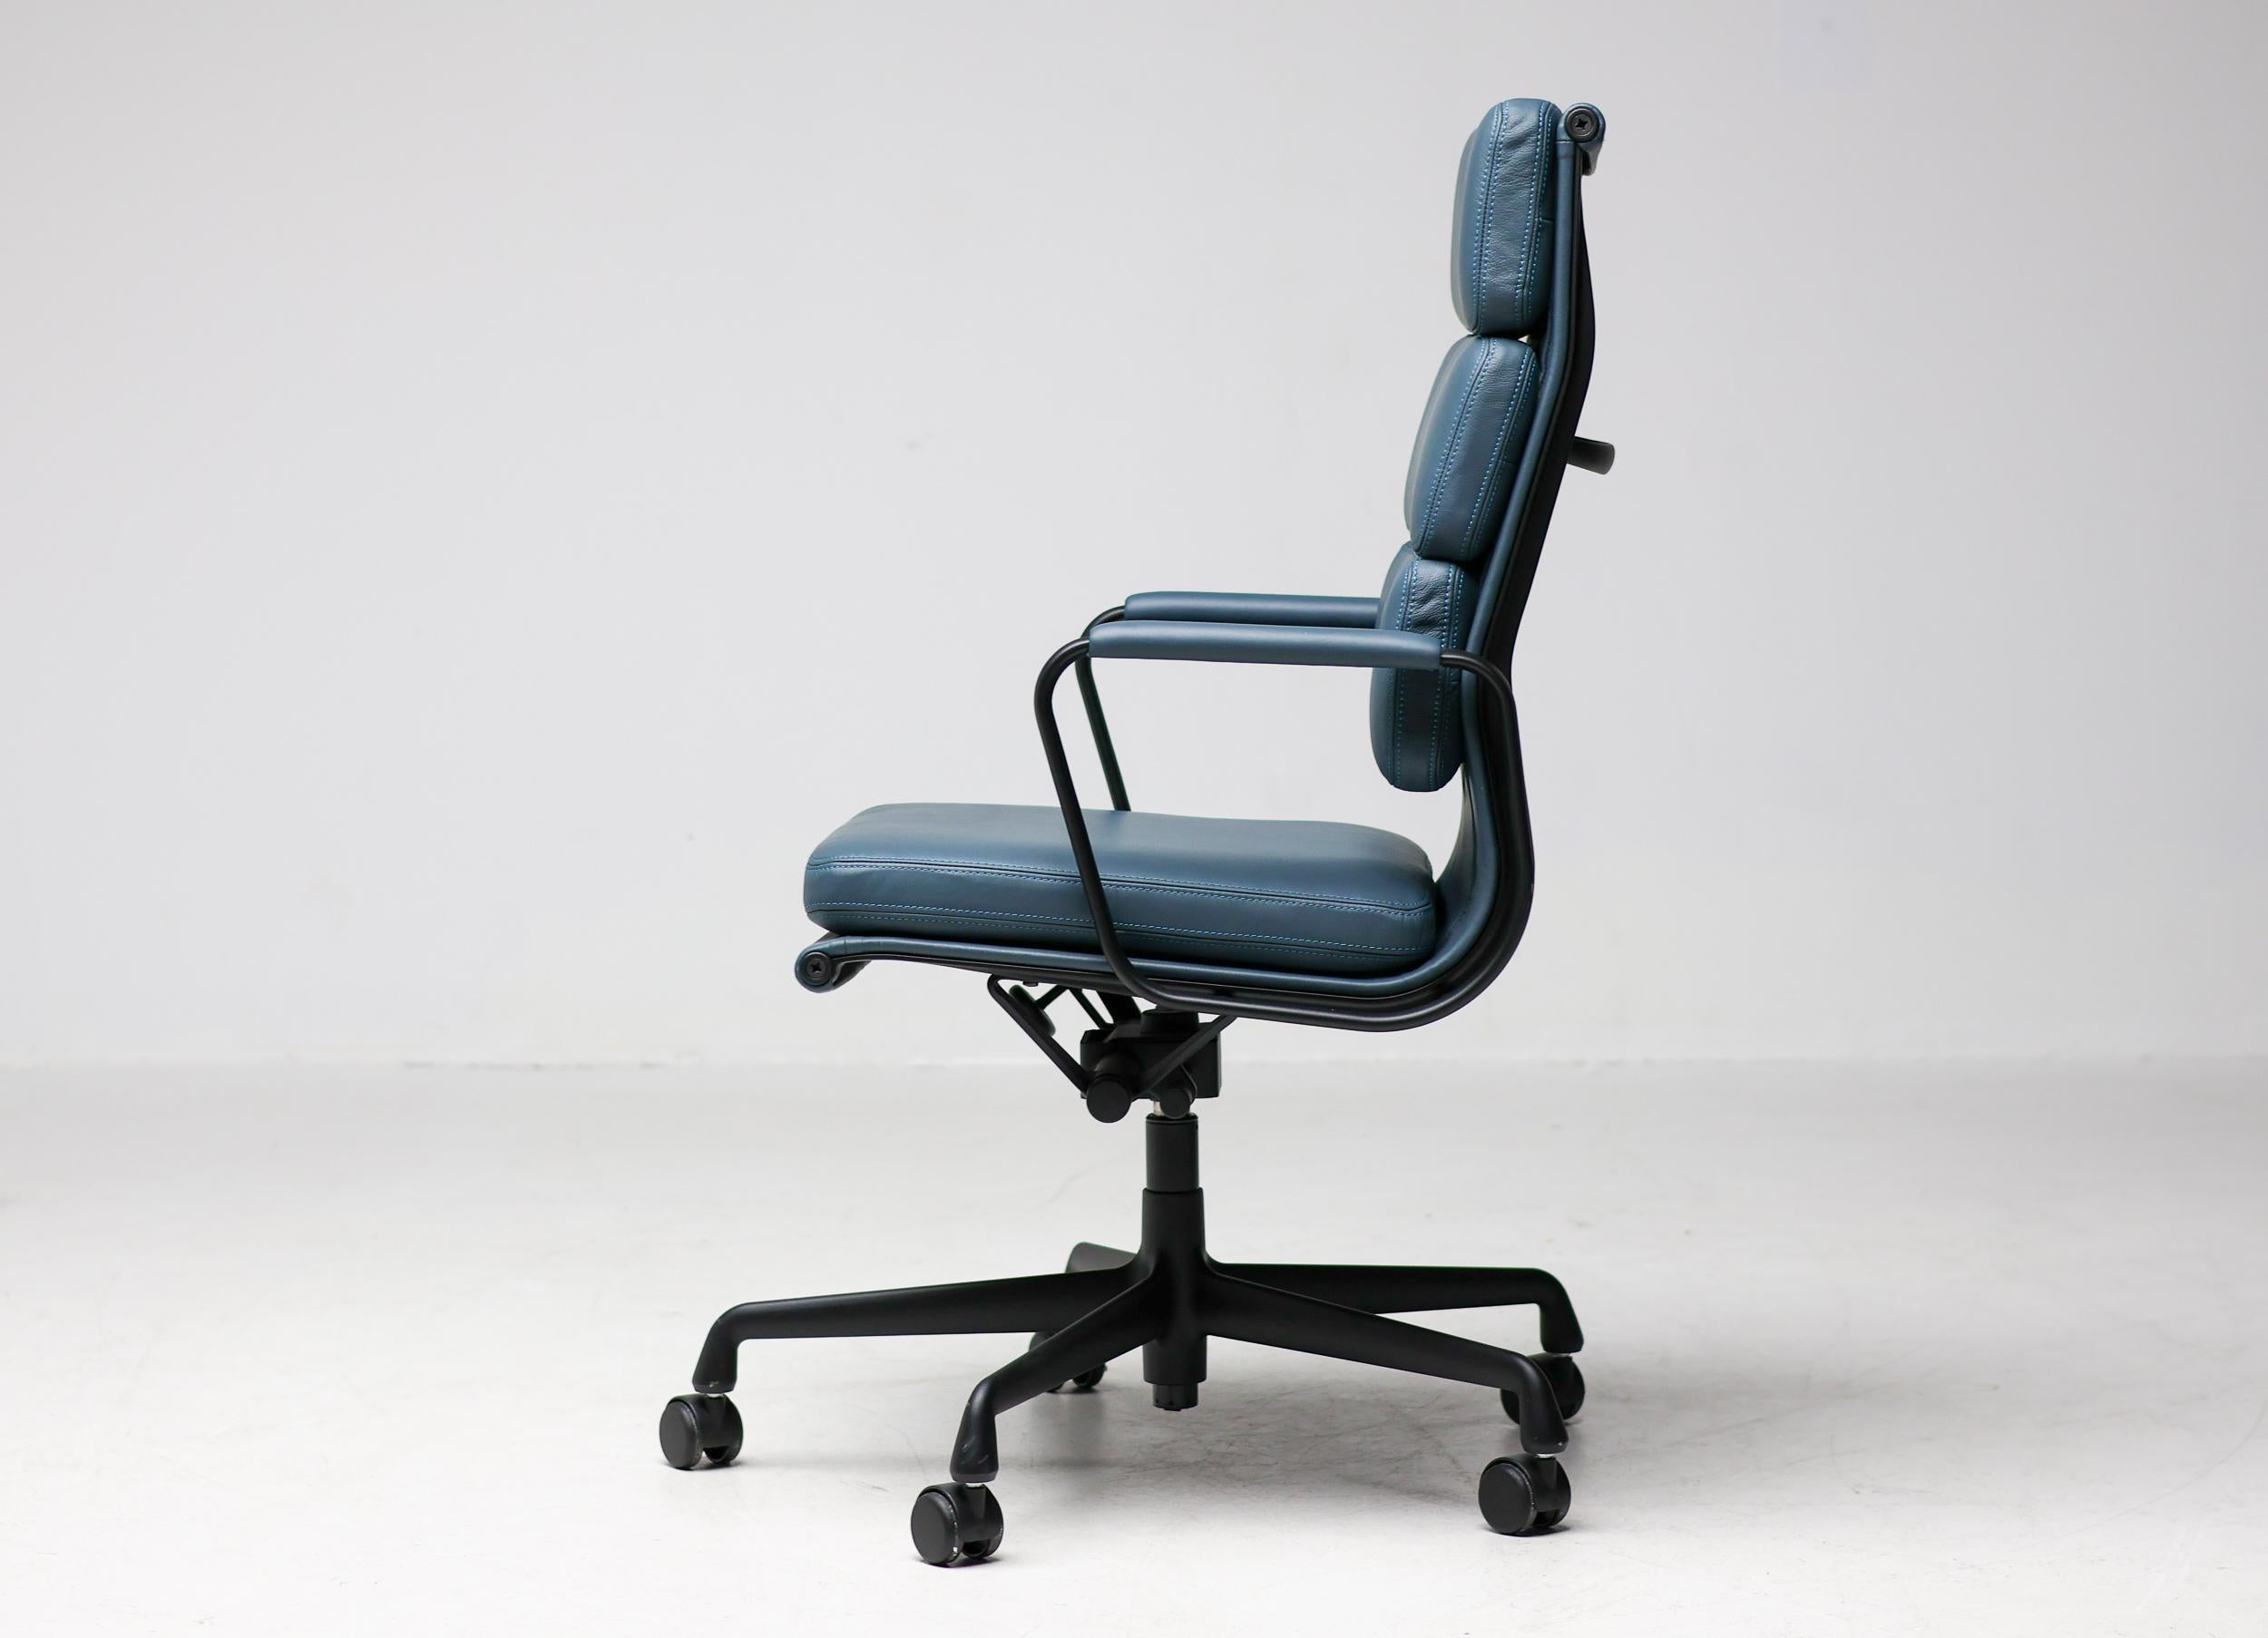 The models EA 217 and EA 219 are the office swivel chairs in the Soft Pad Group by Charles and Ray Eames. Their dignified aura makes them especially suited for management areas. The extraordinary comfort of the chairs results from the combined